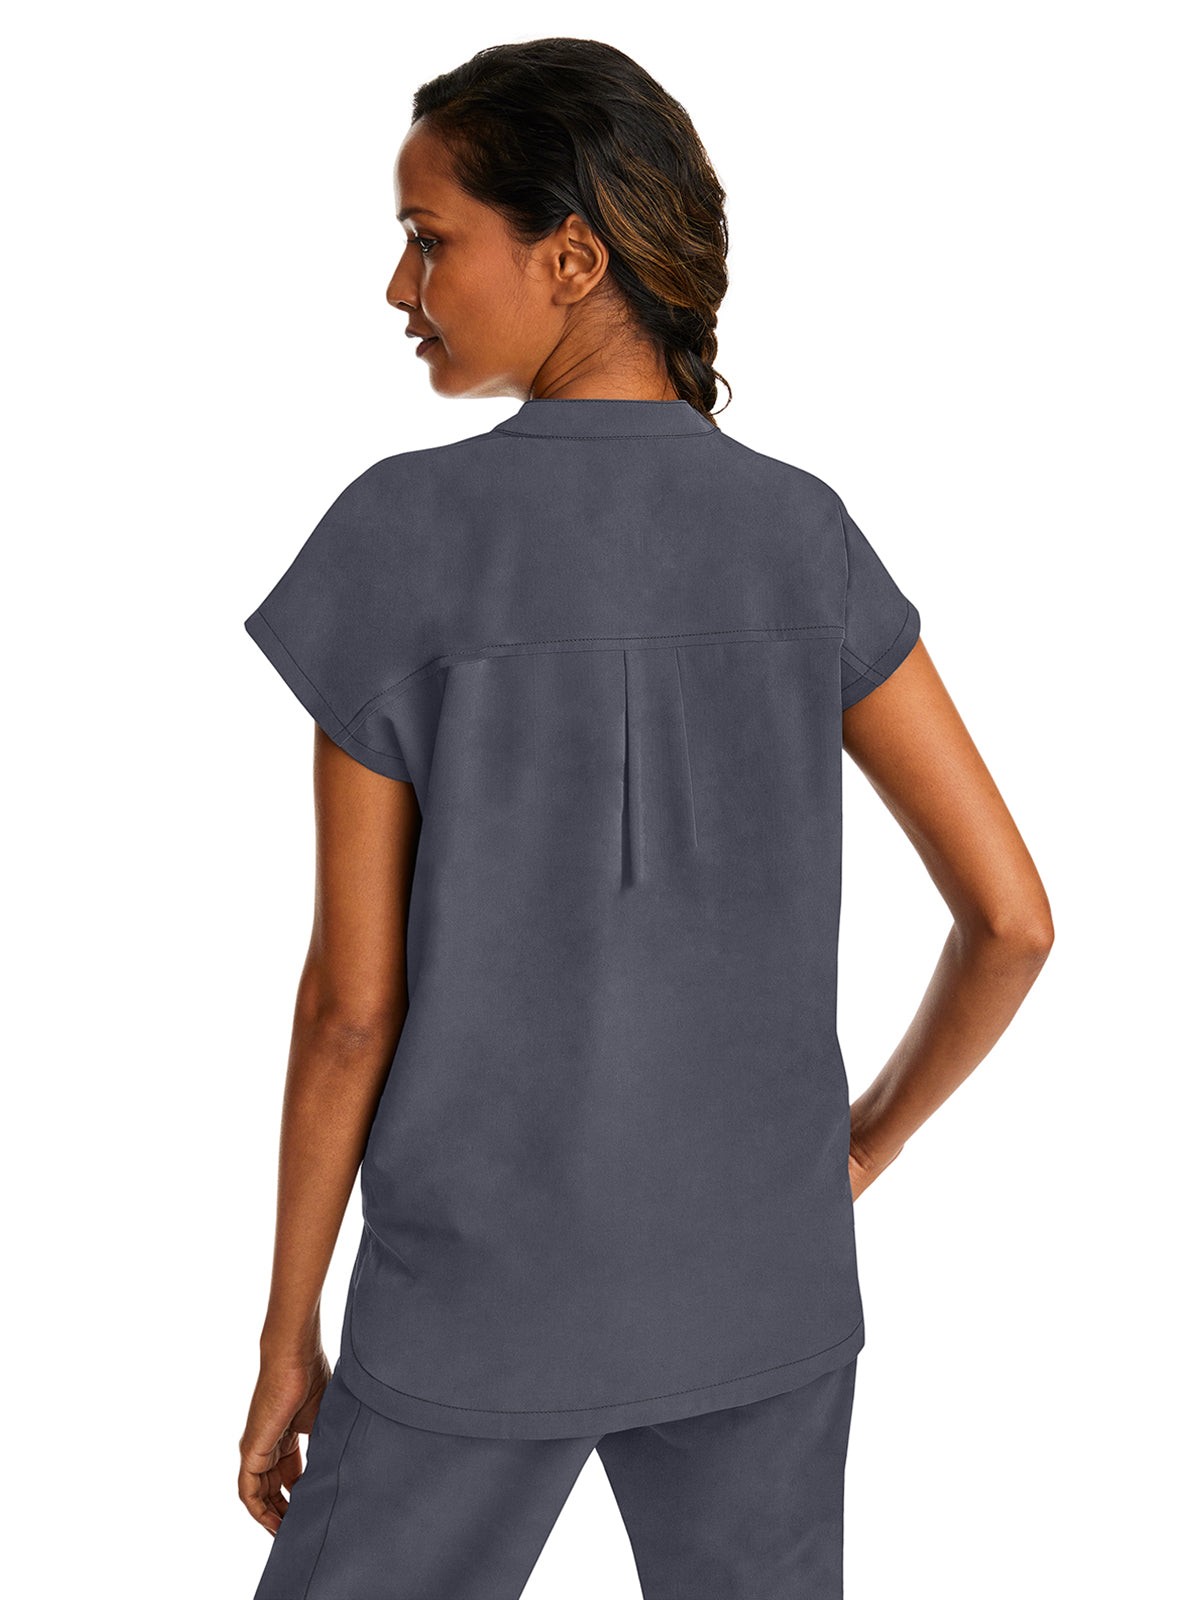 Women's Relaxed Fit Top